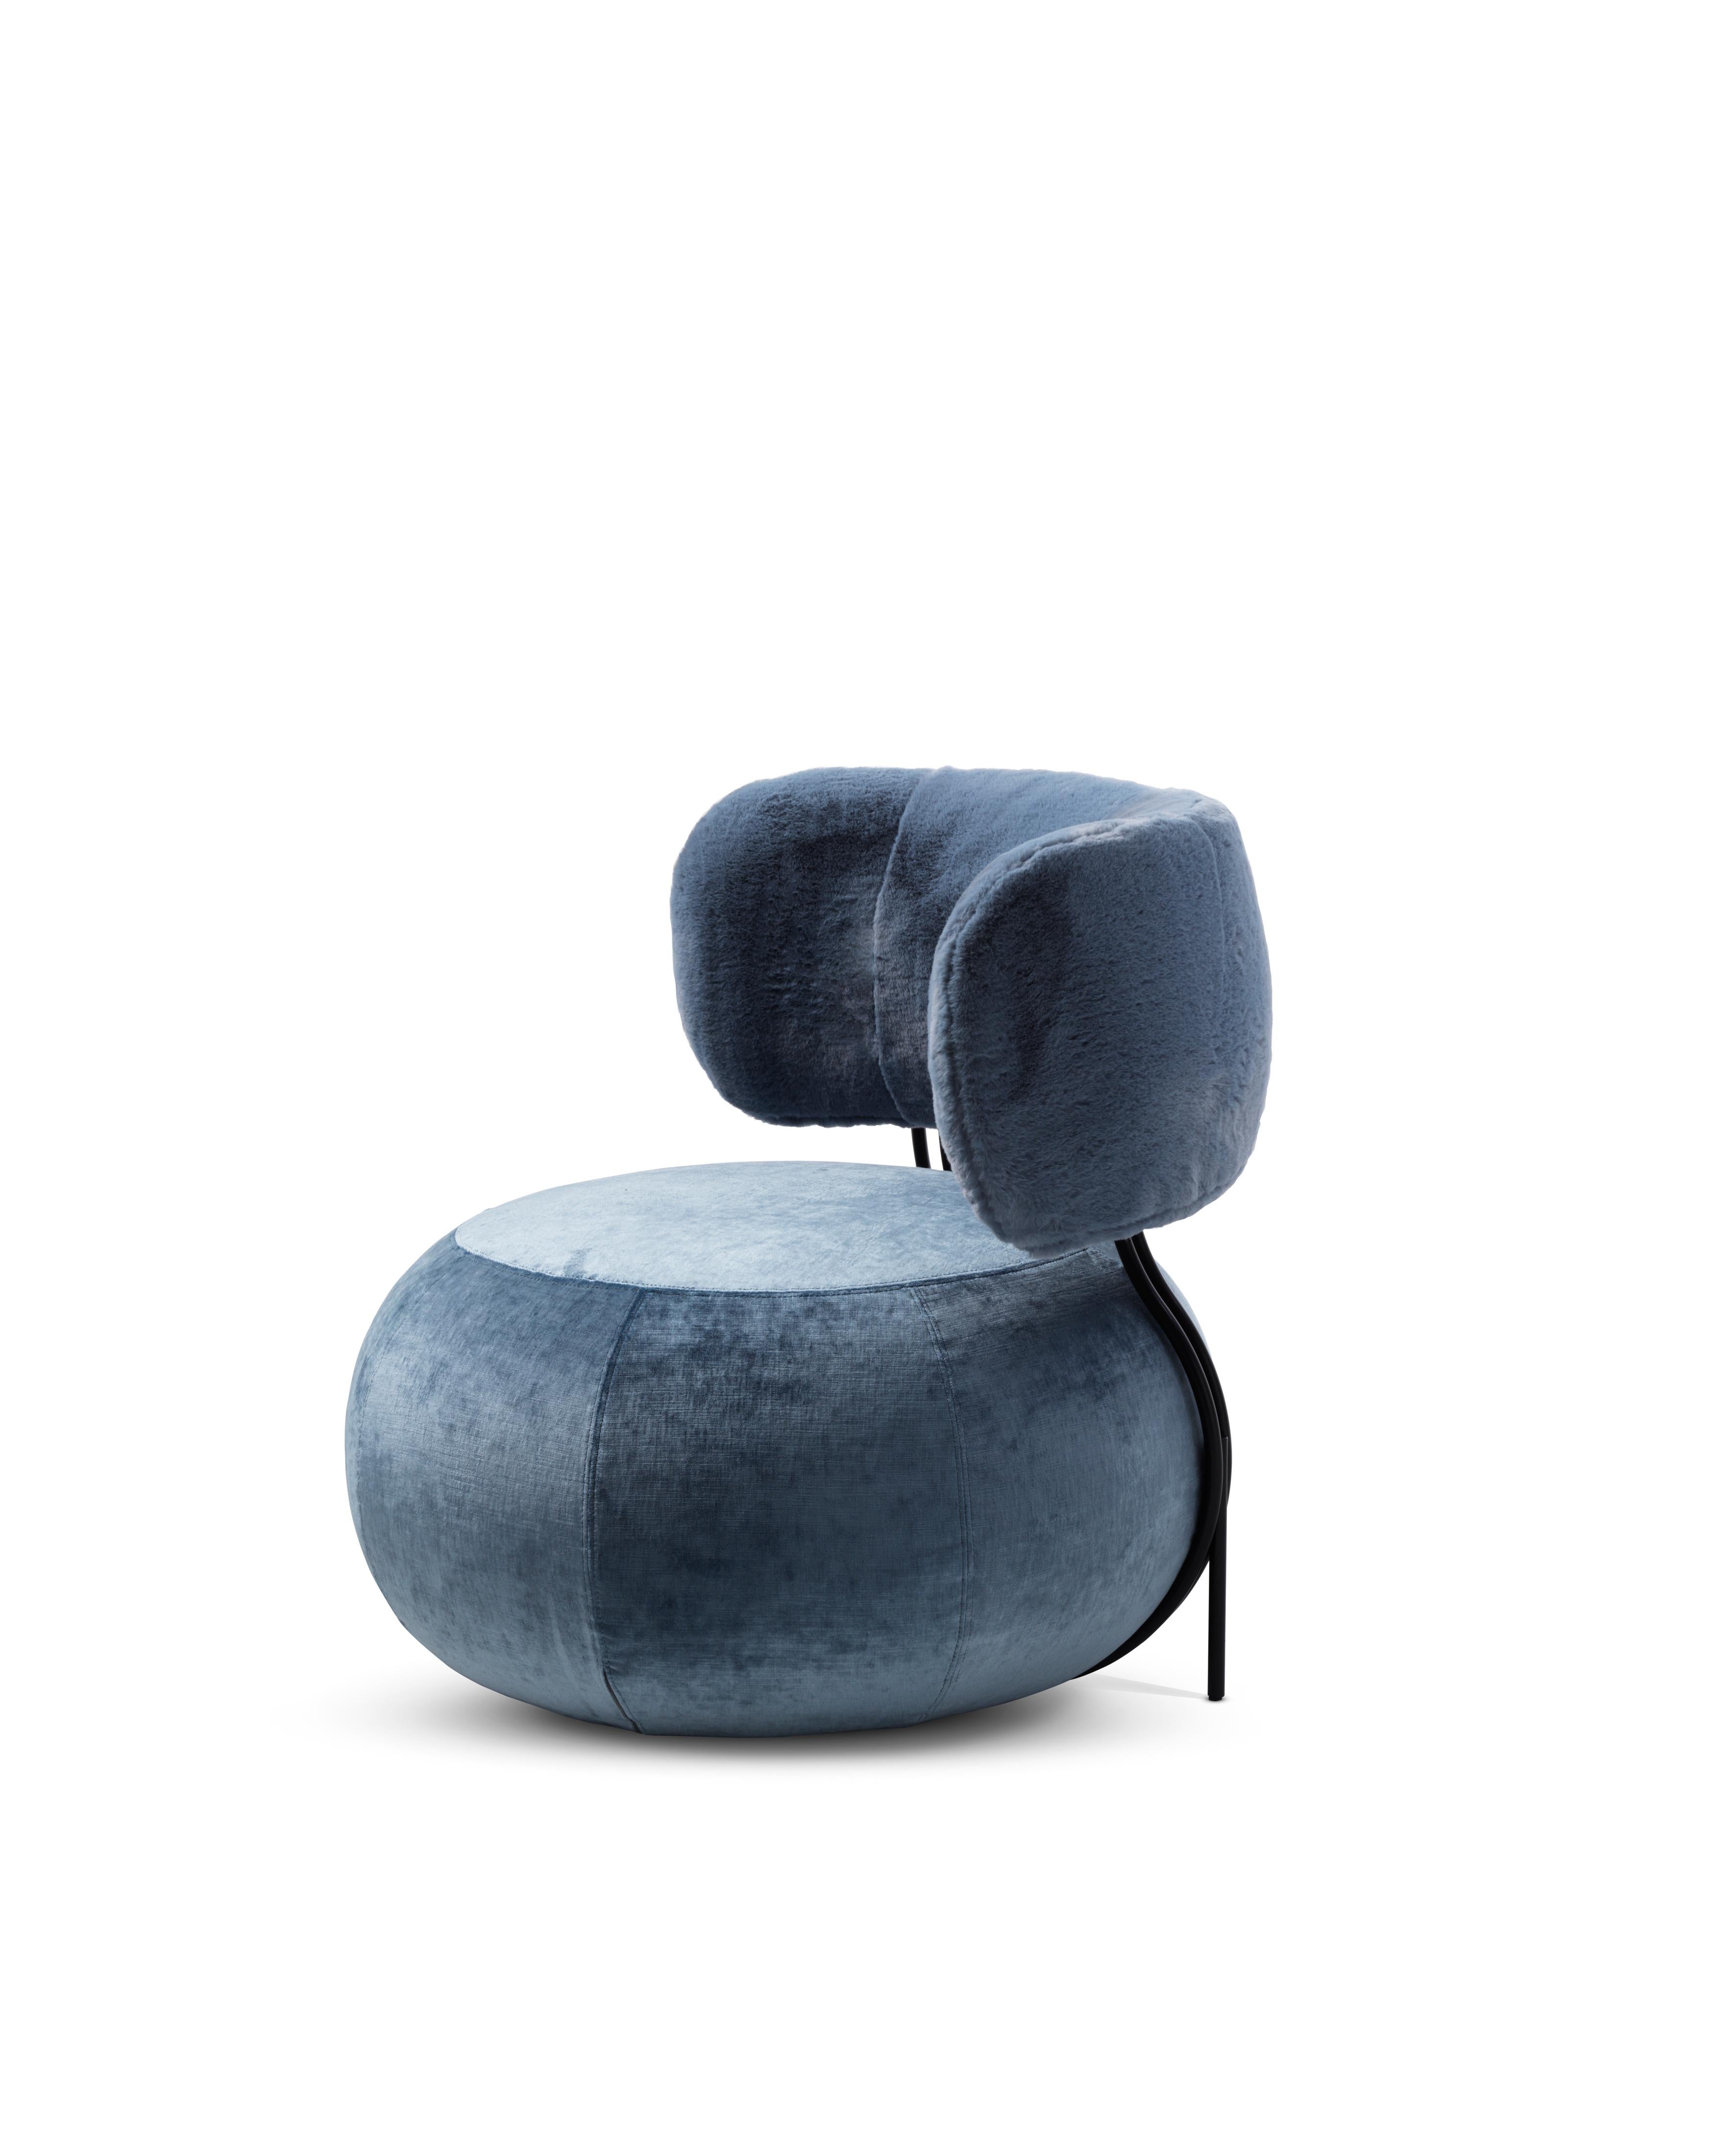 The Geo collection is enriched with a fun element: a completely rounded armchair created utilizing the namesake pouf as its seat. The metal rod structure supports the curved padded wooden back. The proportions are generous without being